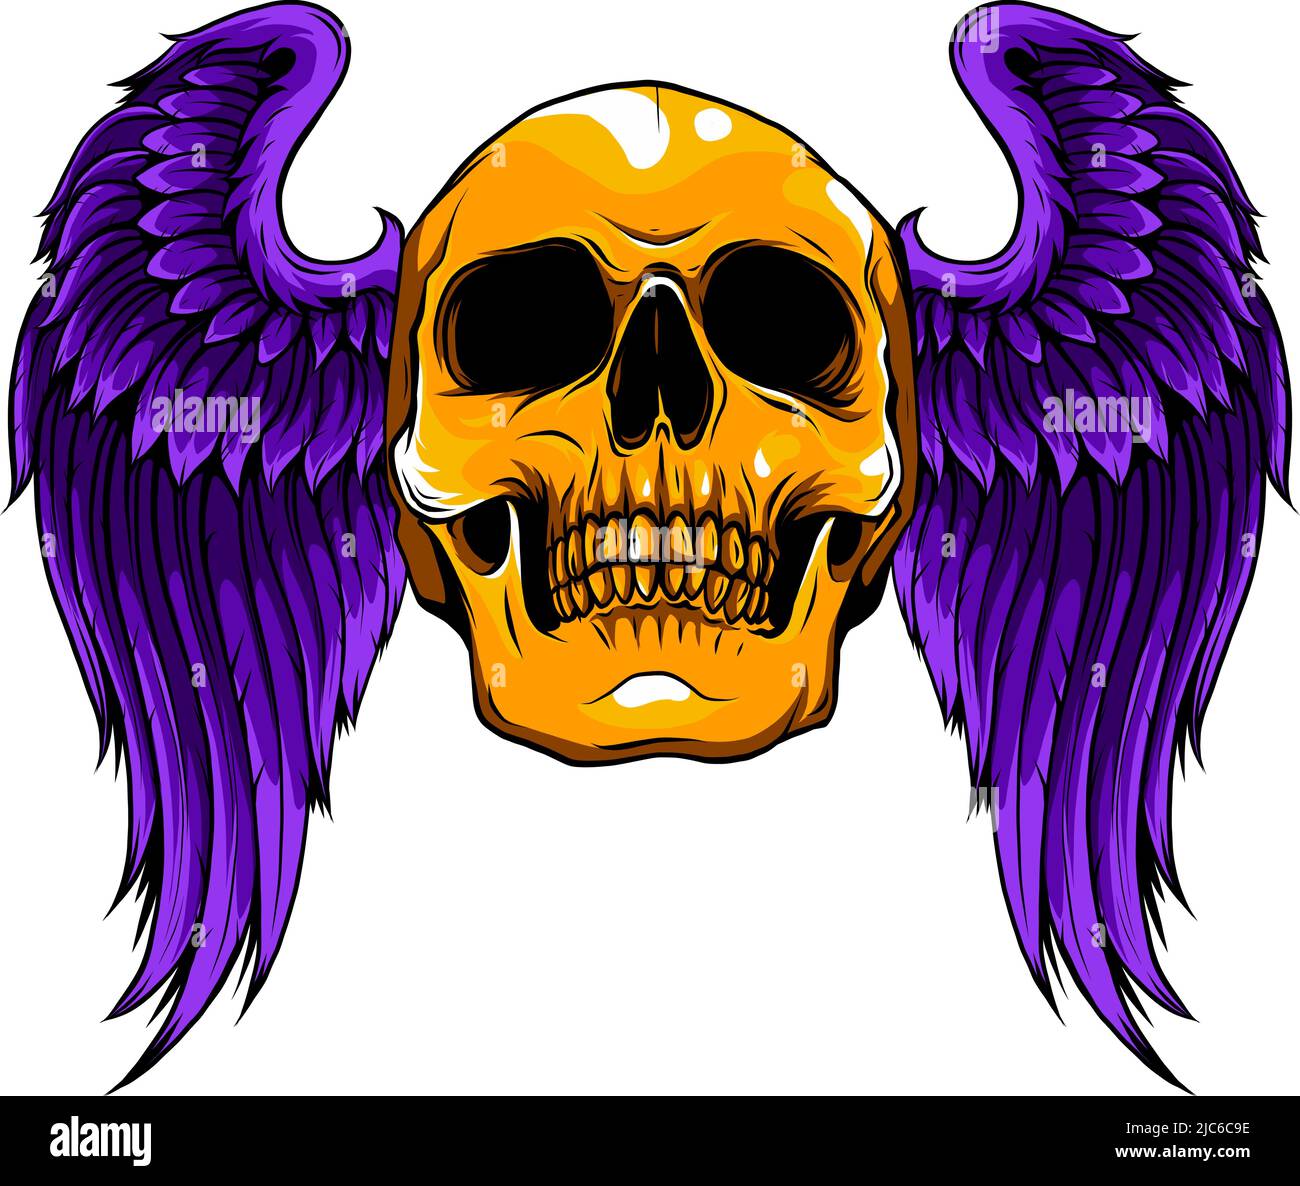 The short angel wings with the unique human dead skull of illustration Stock Vector